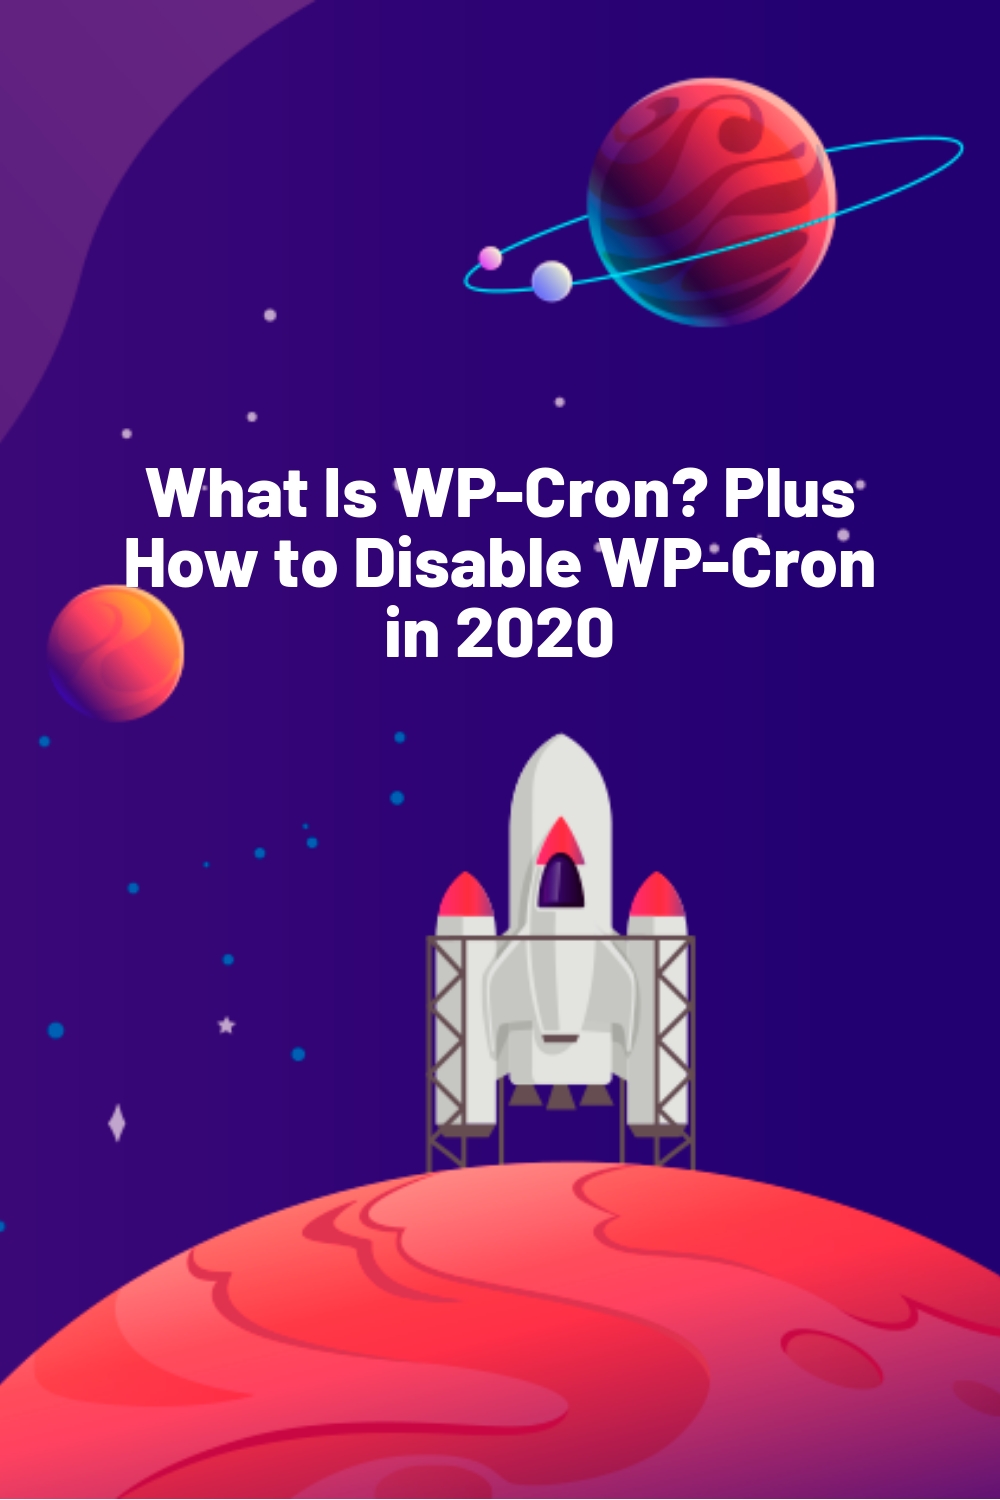 What Is WP-Cron? Plus How to Disable WP-Cron in 2020